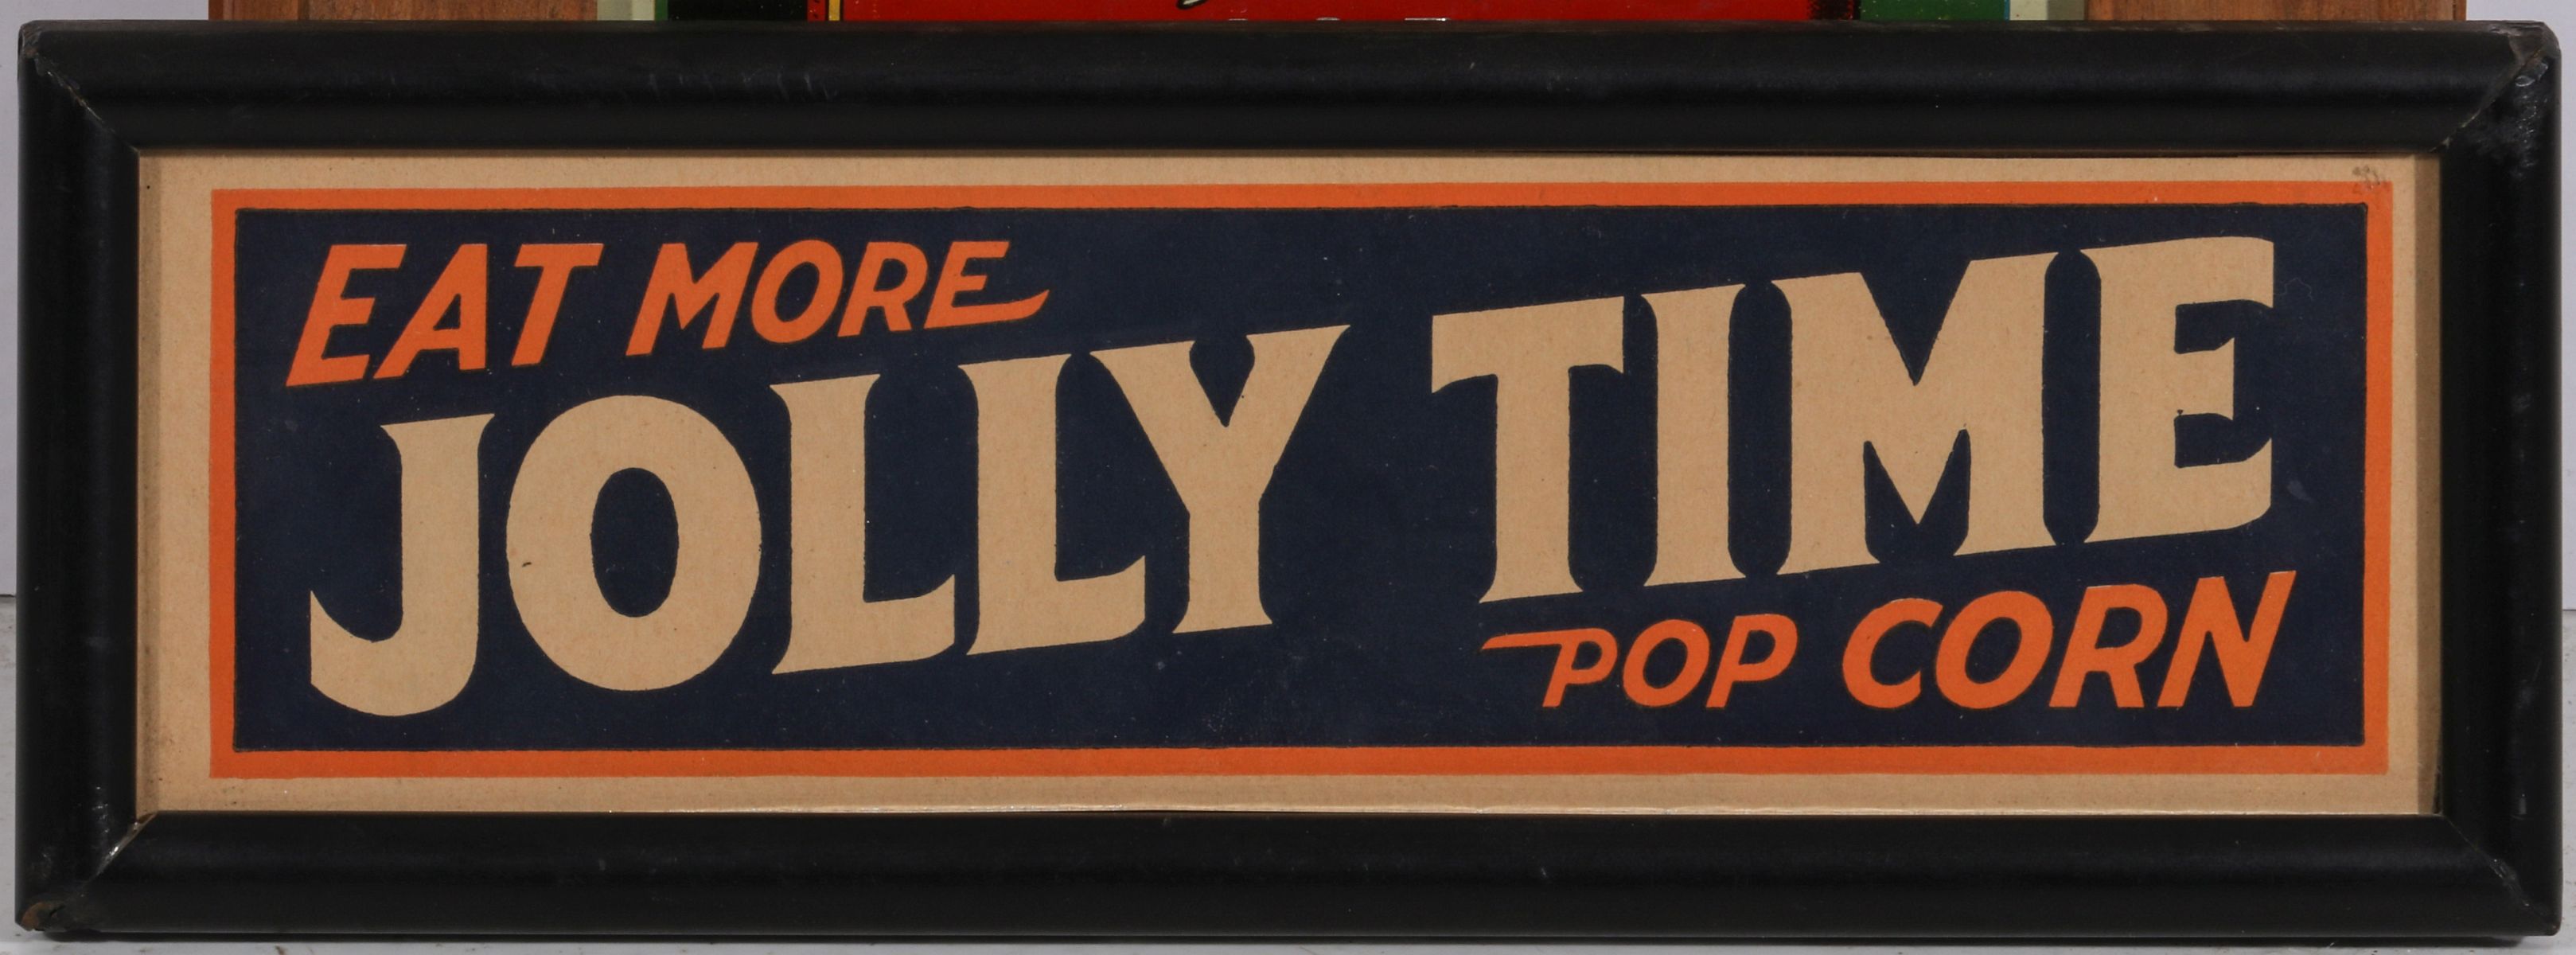 JOLLY TIME POP CORN LITHO ADVERTISING SIGN C 1930